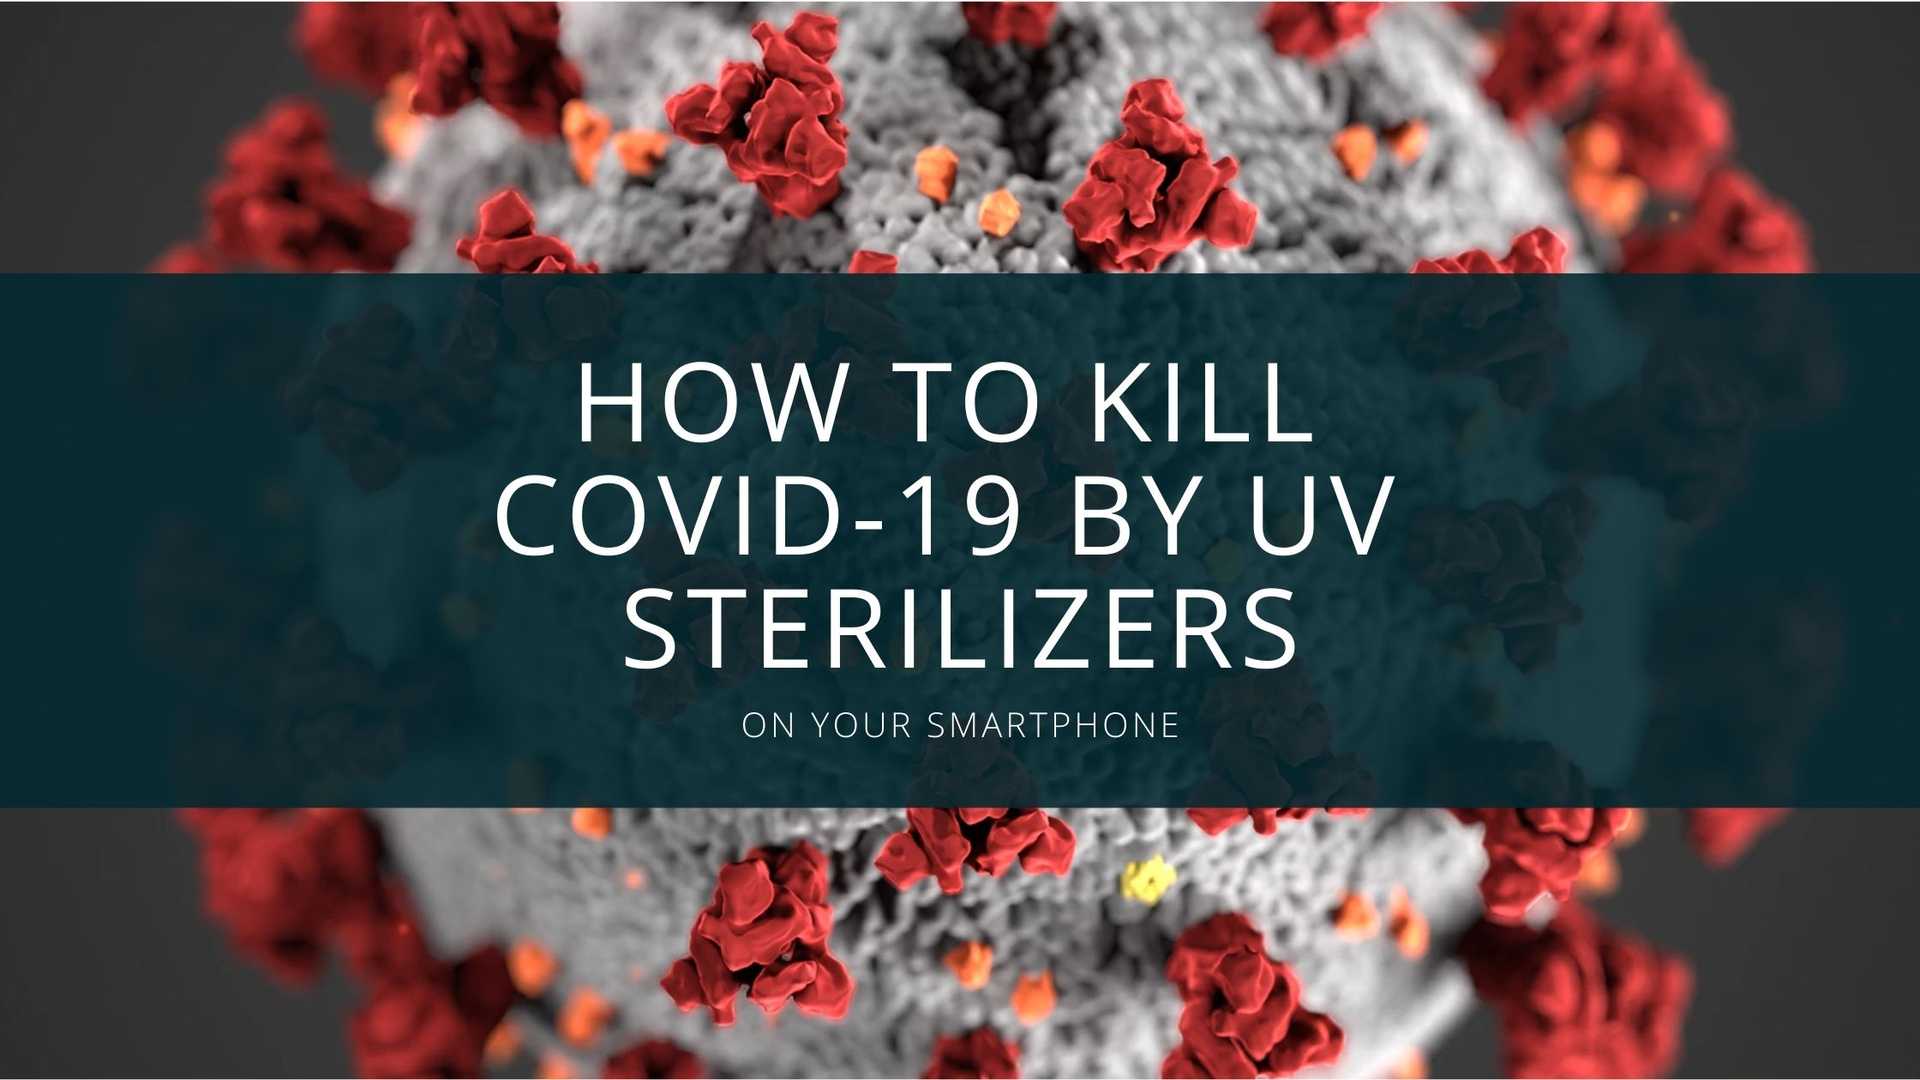 How to kill Covid-19 by UV Sterilizers for your Smartphone